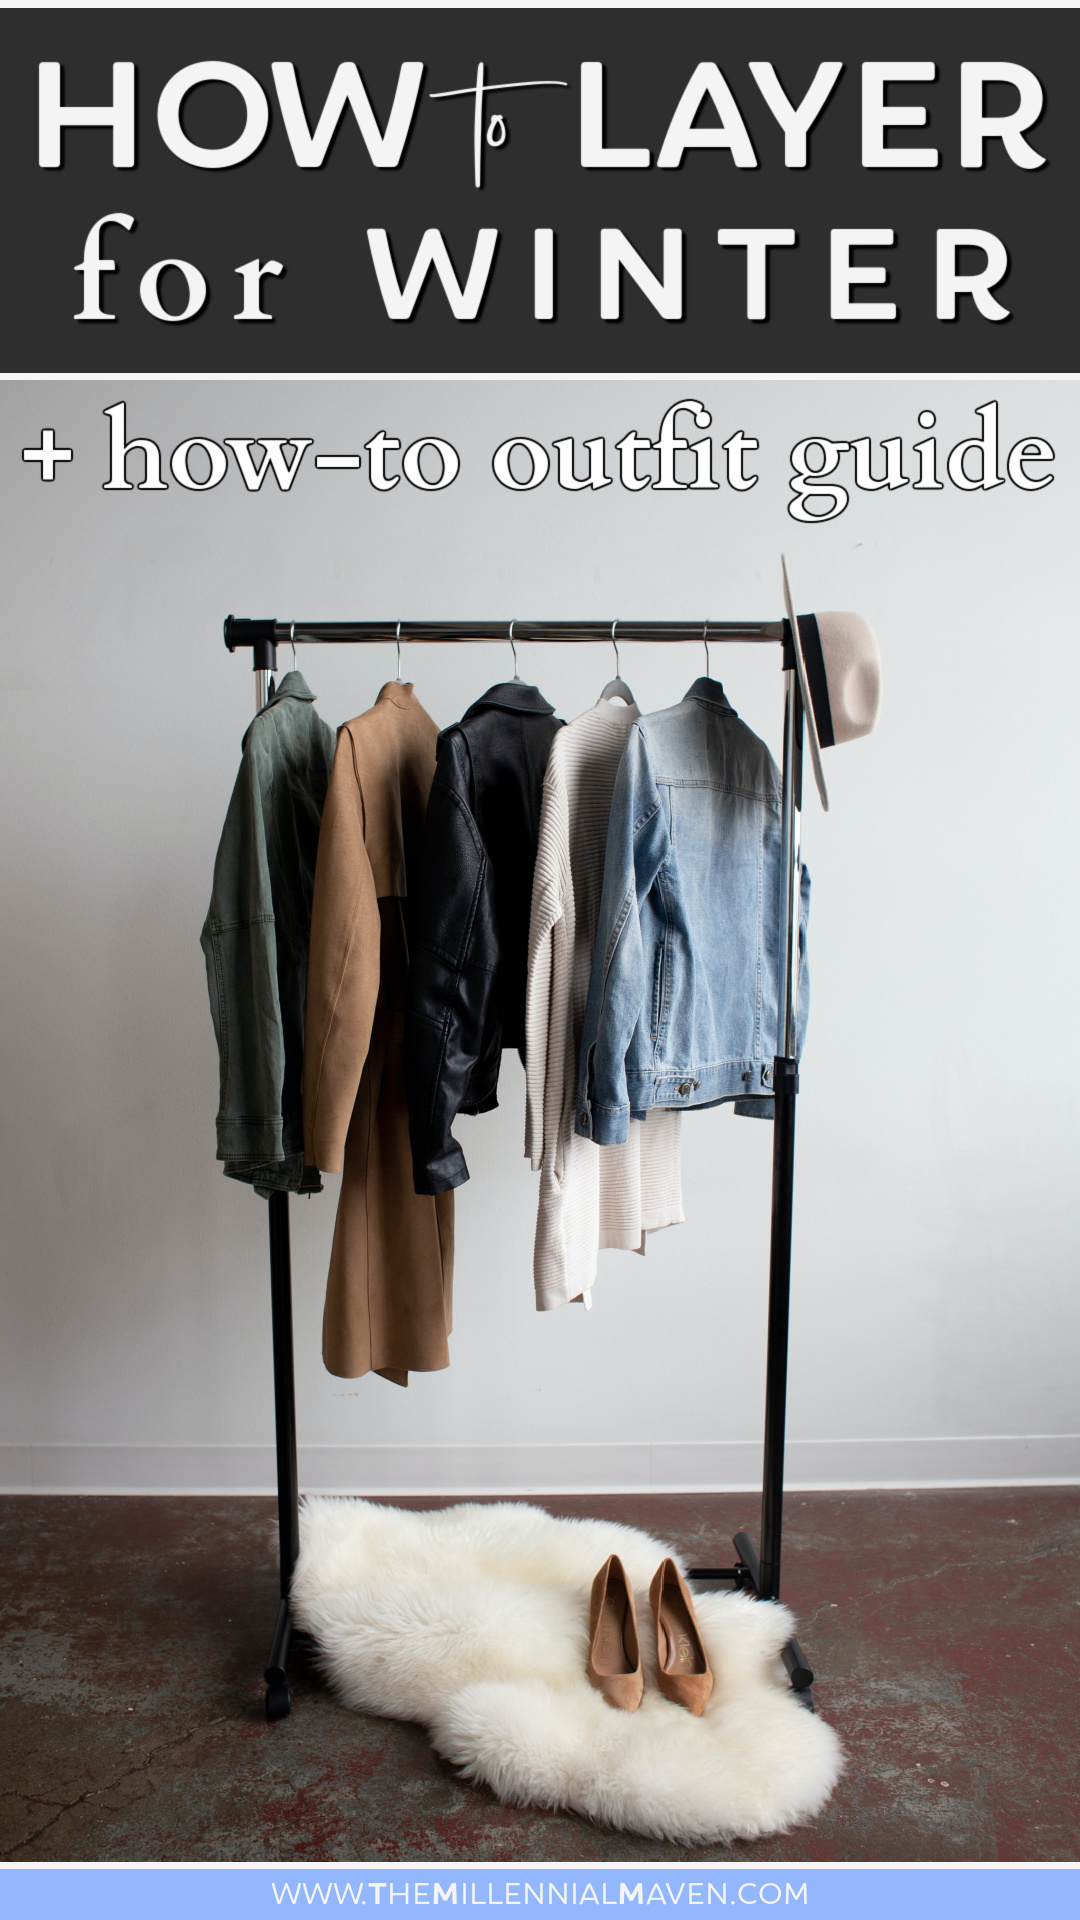 How To Layer Winter Travel Pin 5